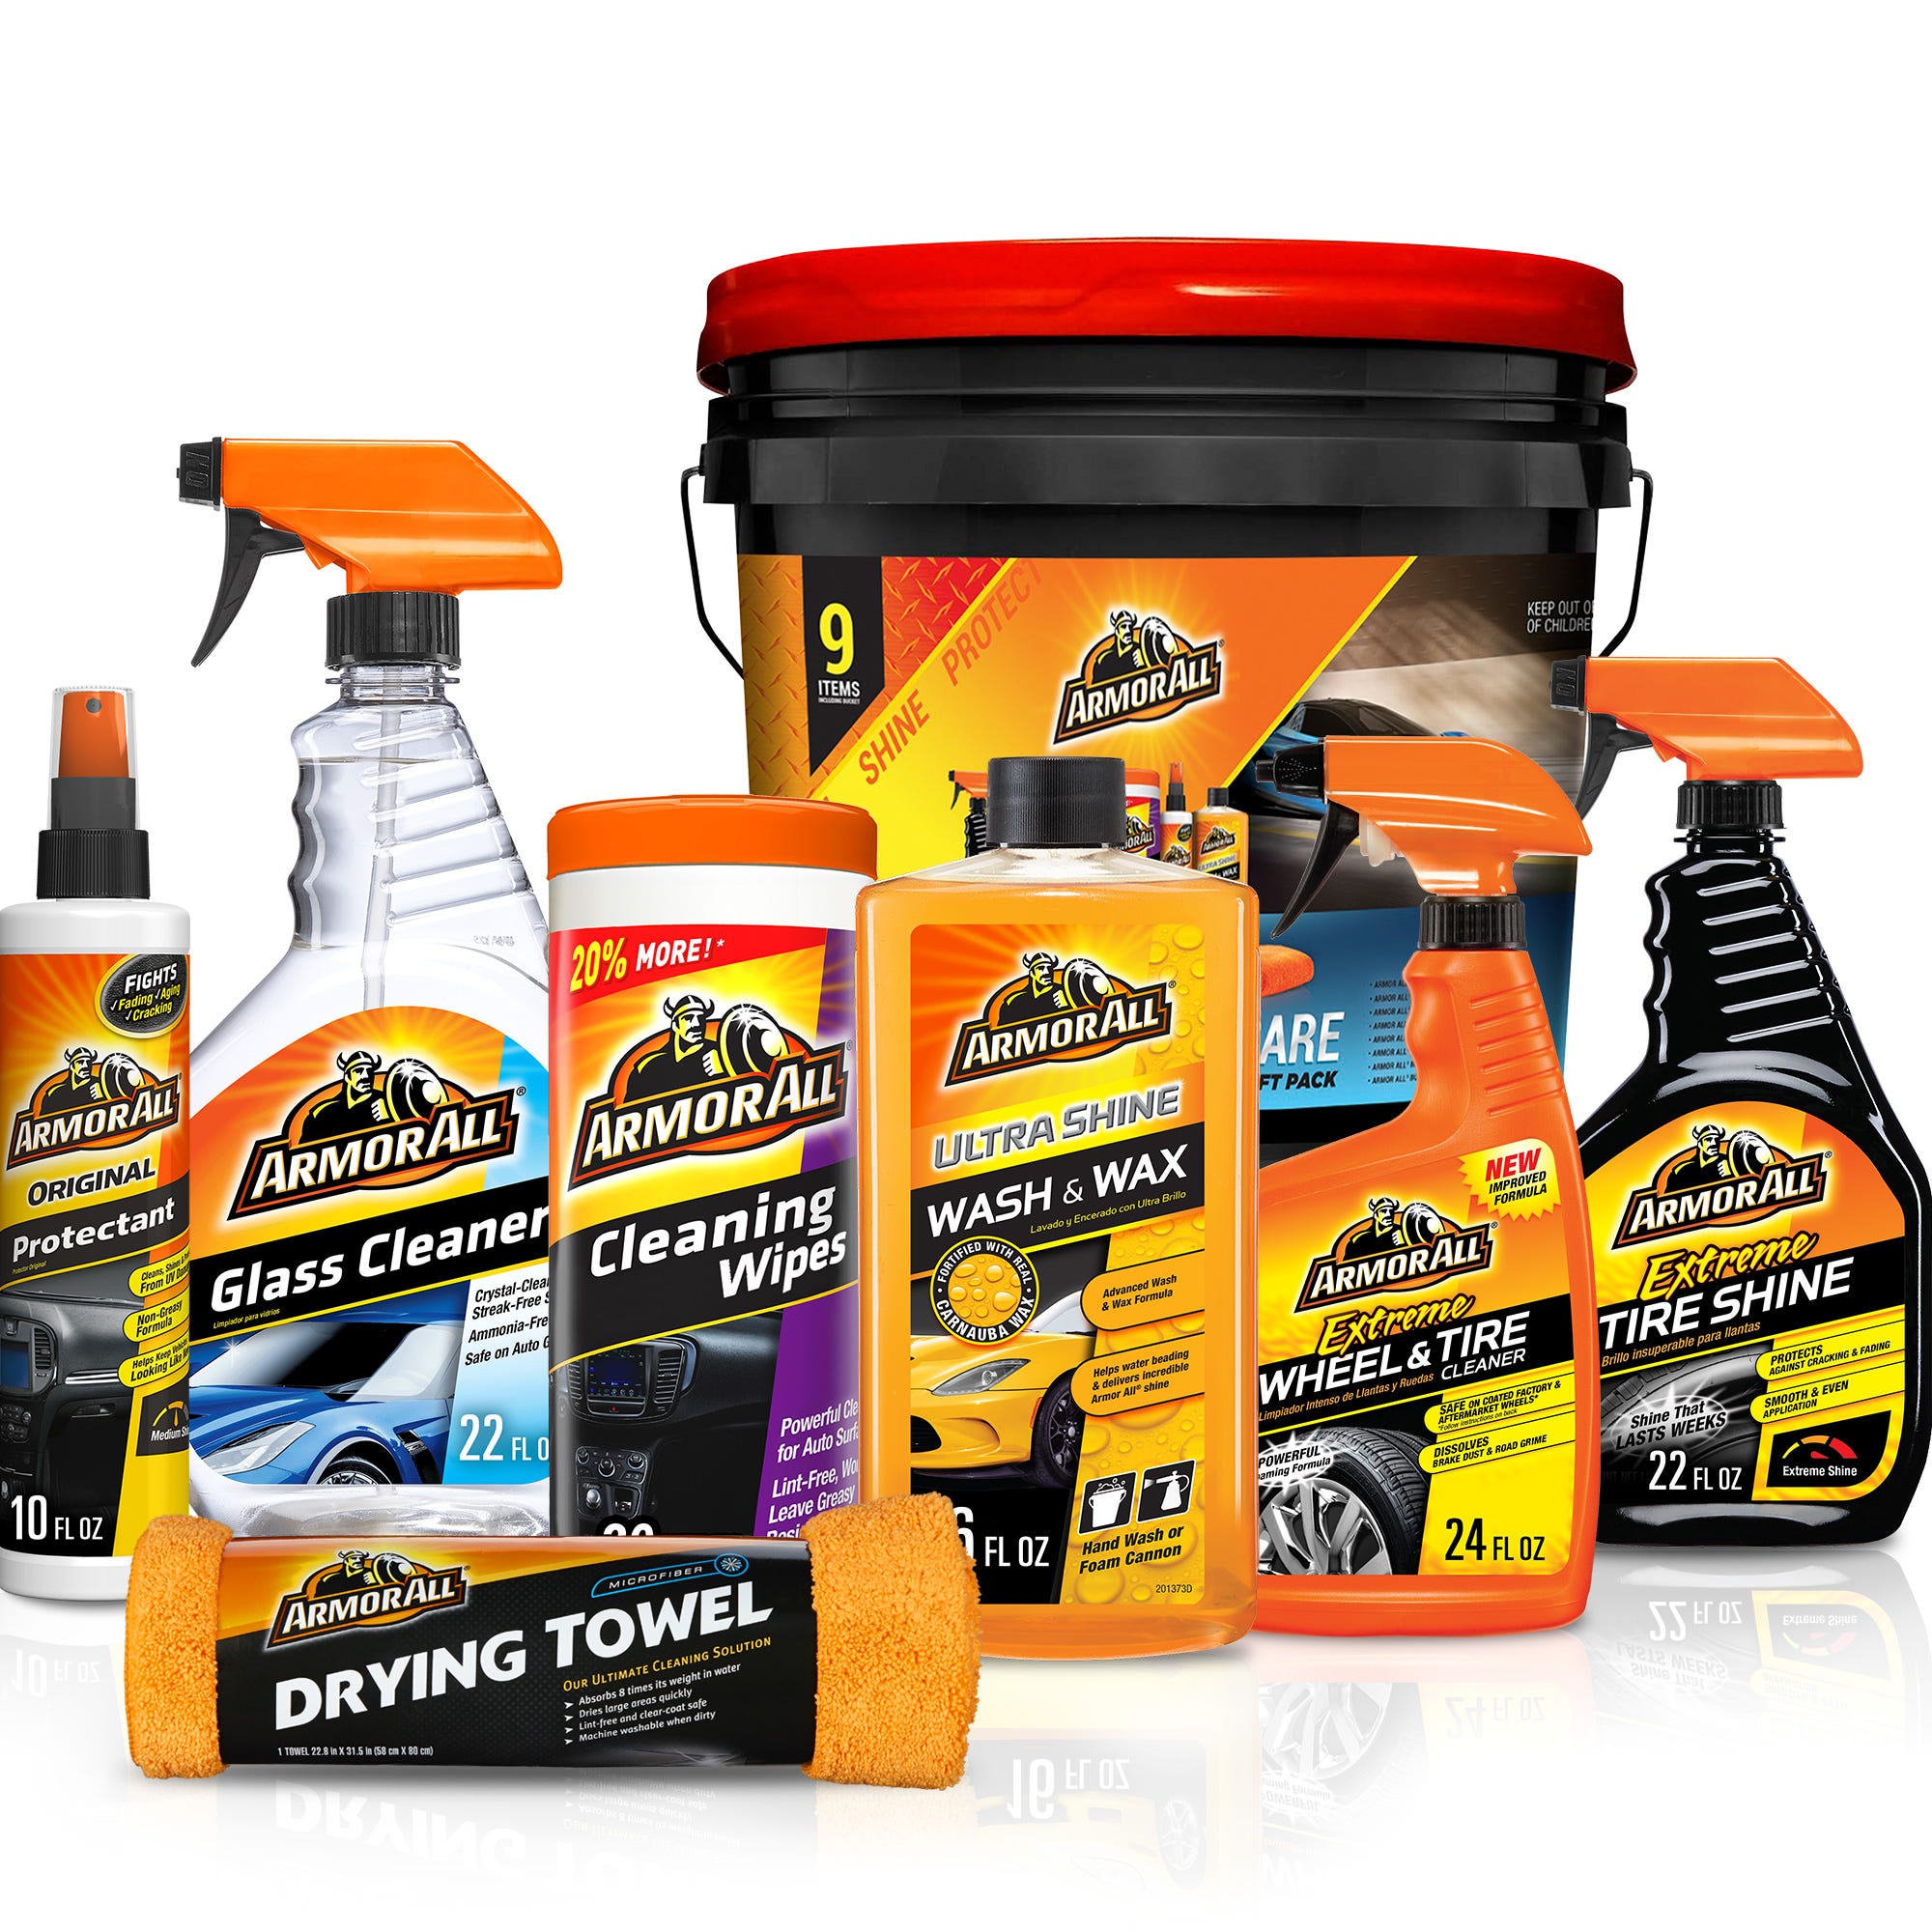 This Armor All 9-piece car care kit is just $19.88 at Walmart